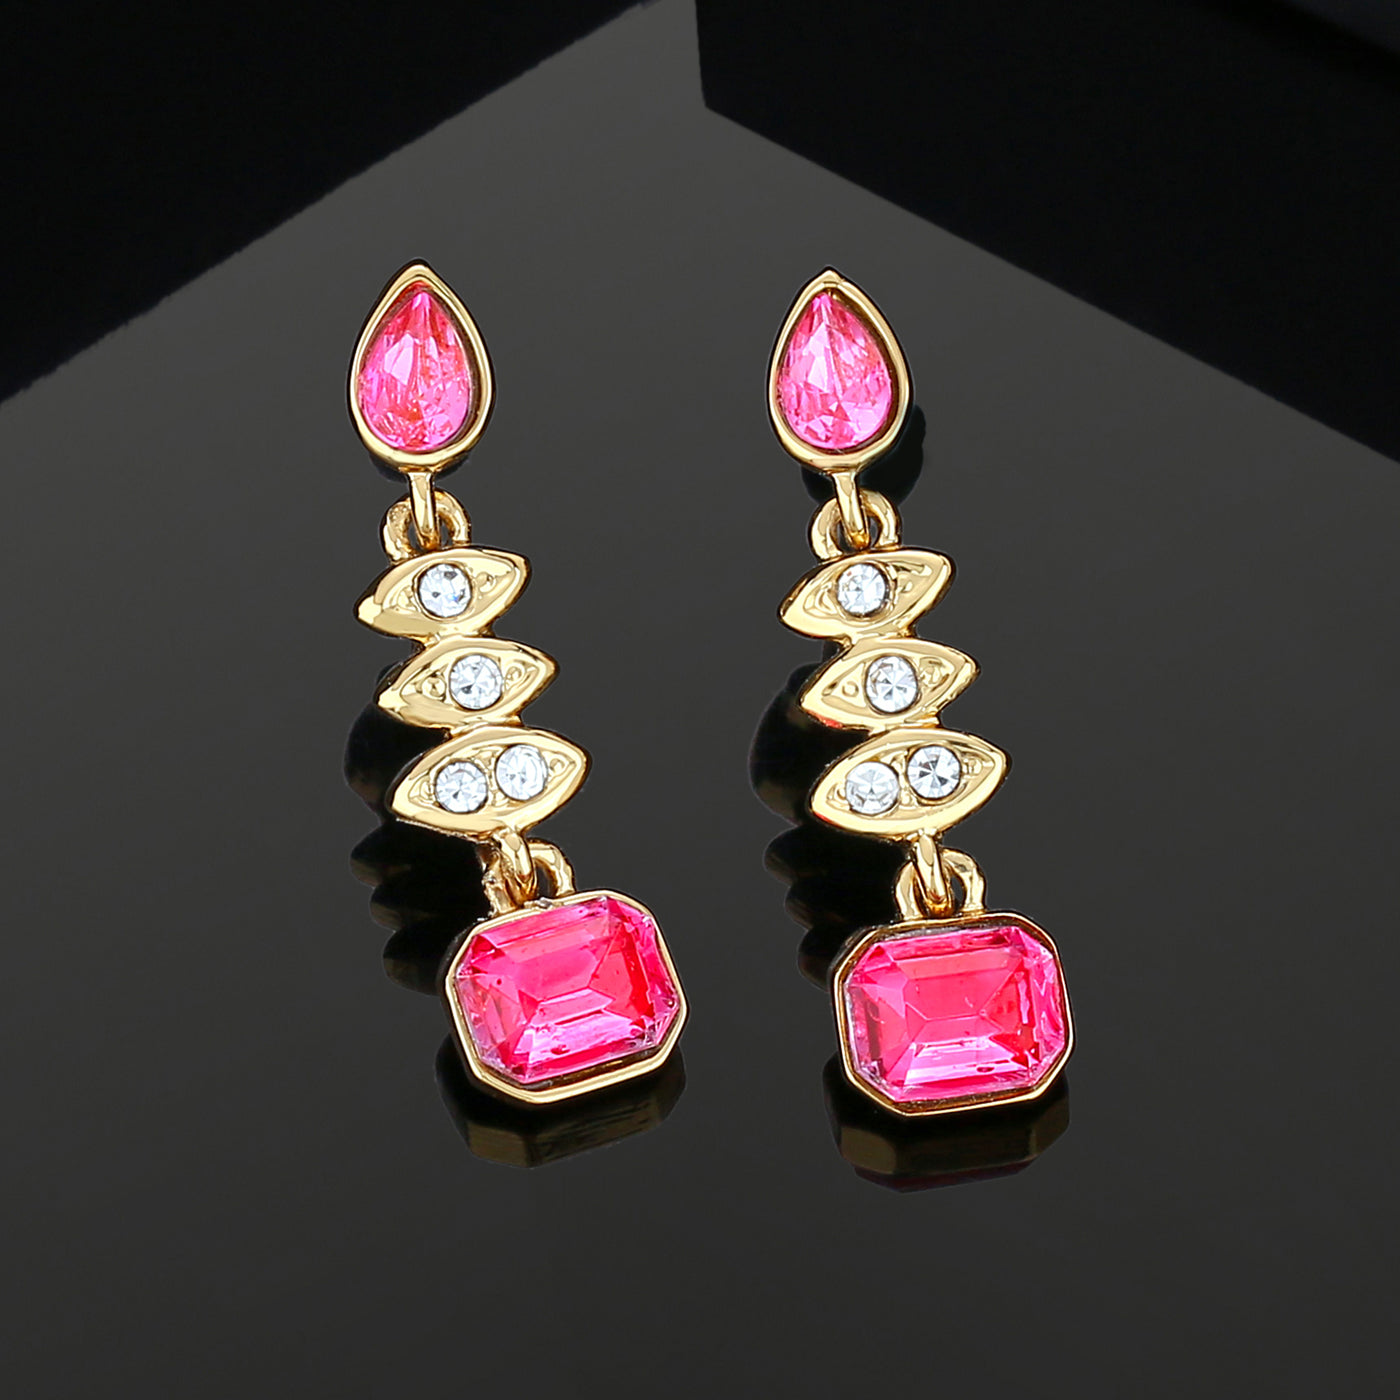 Estele Gold Plated Elegant Drop Earrings with Crystals for Women